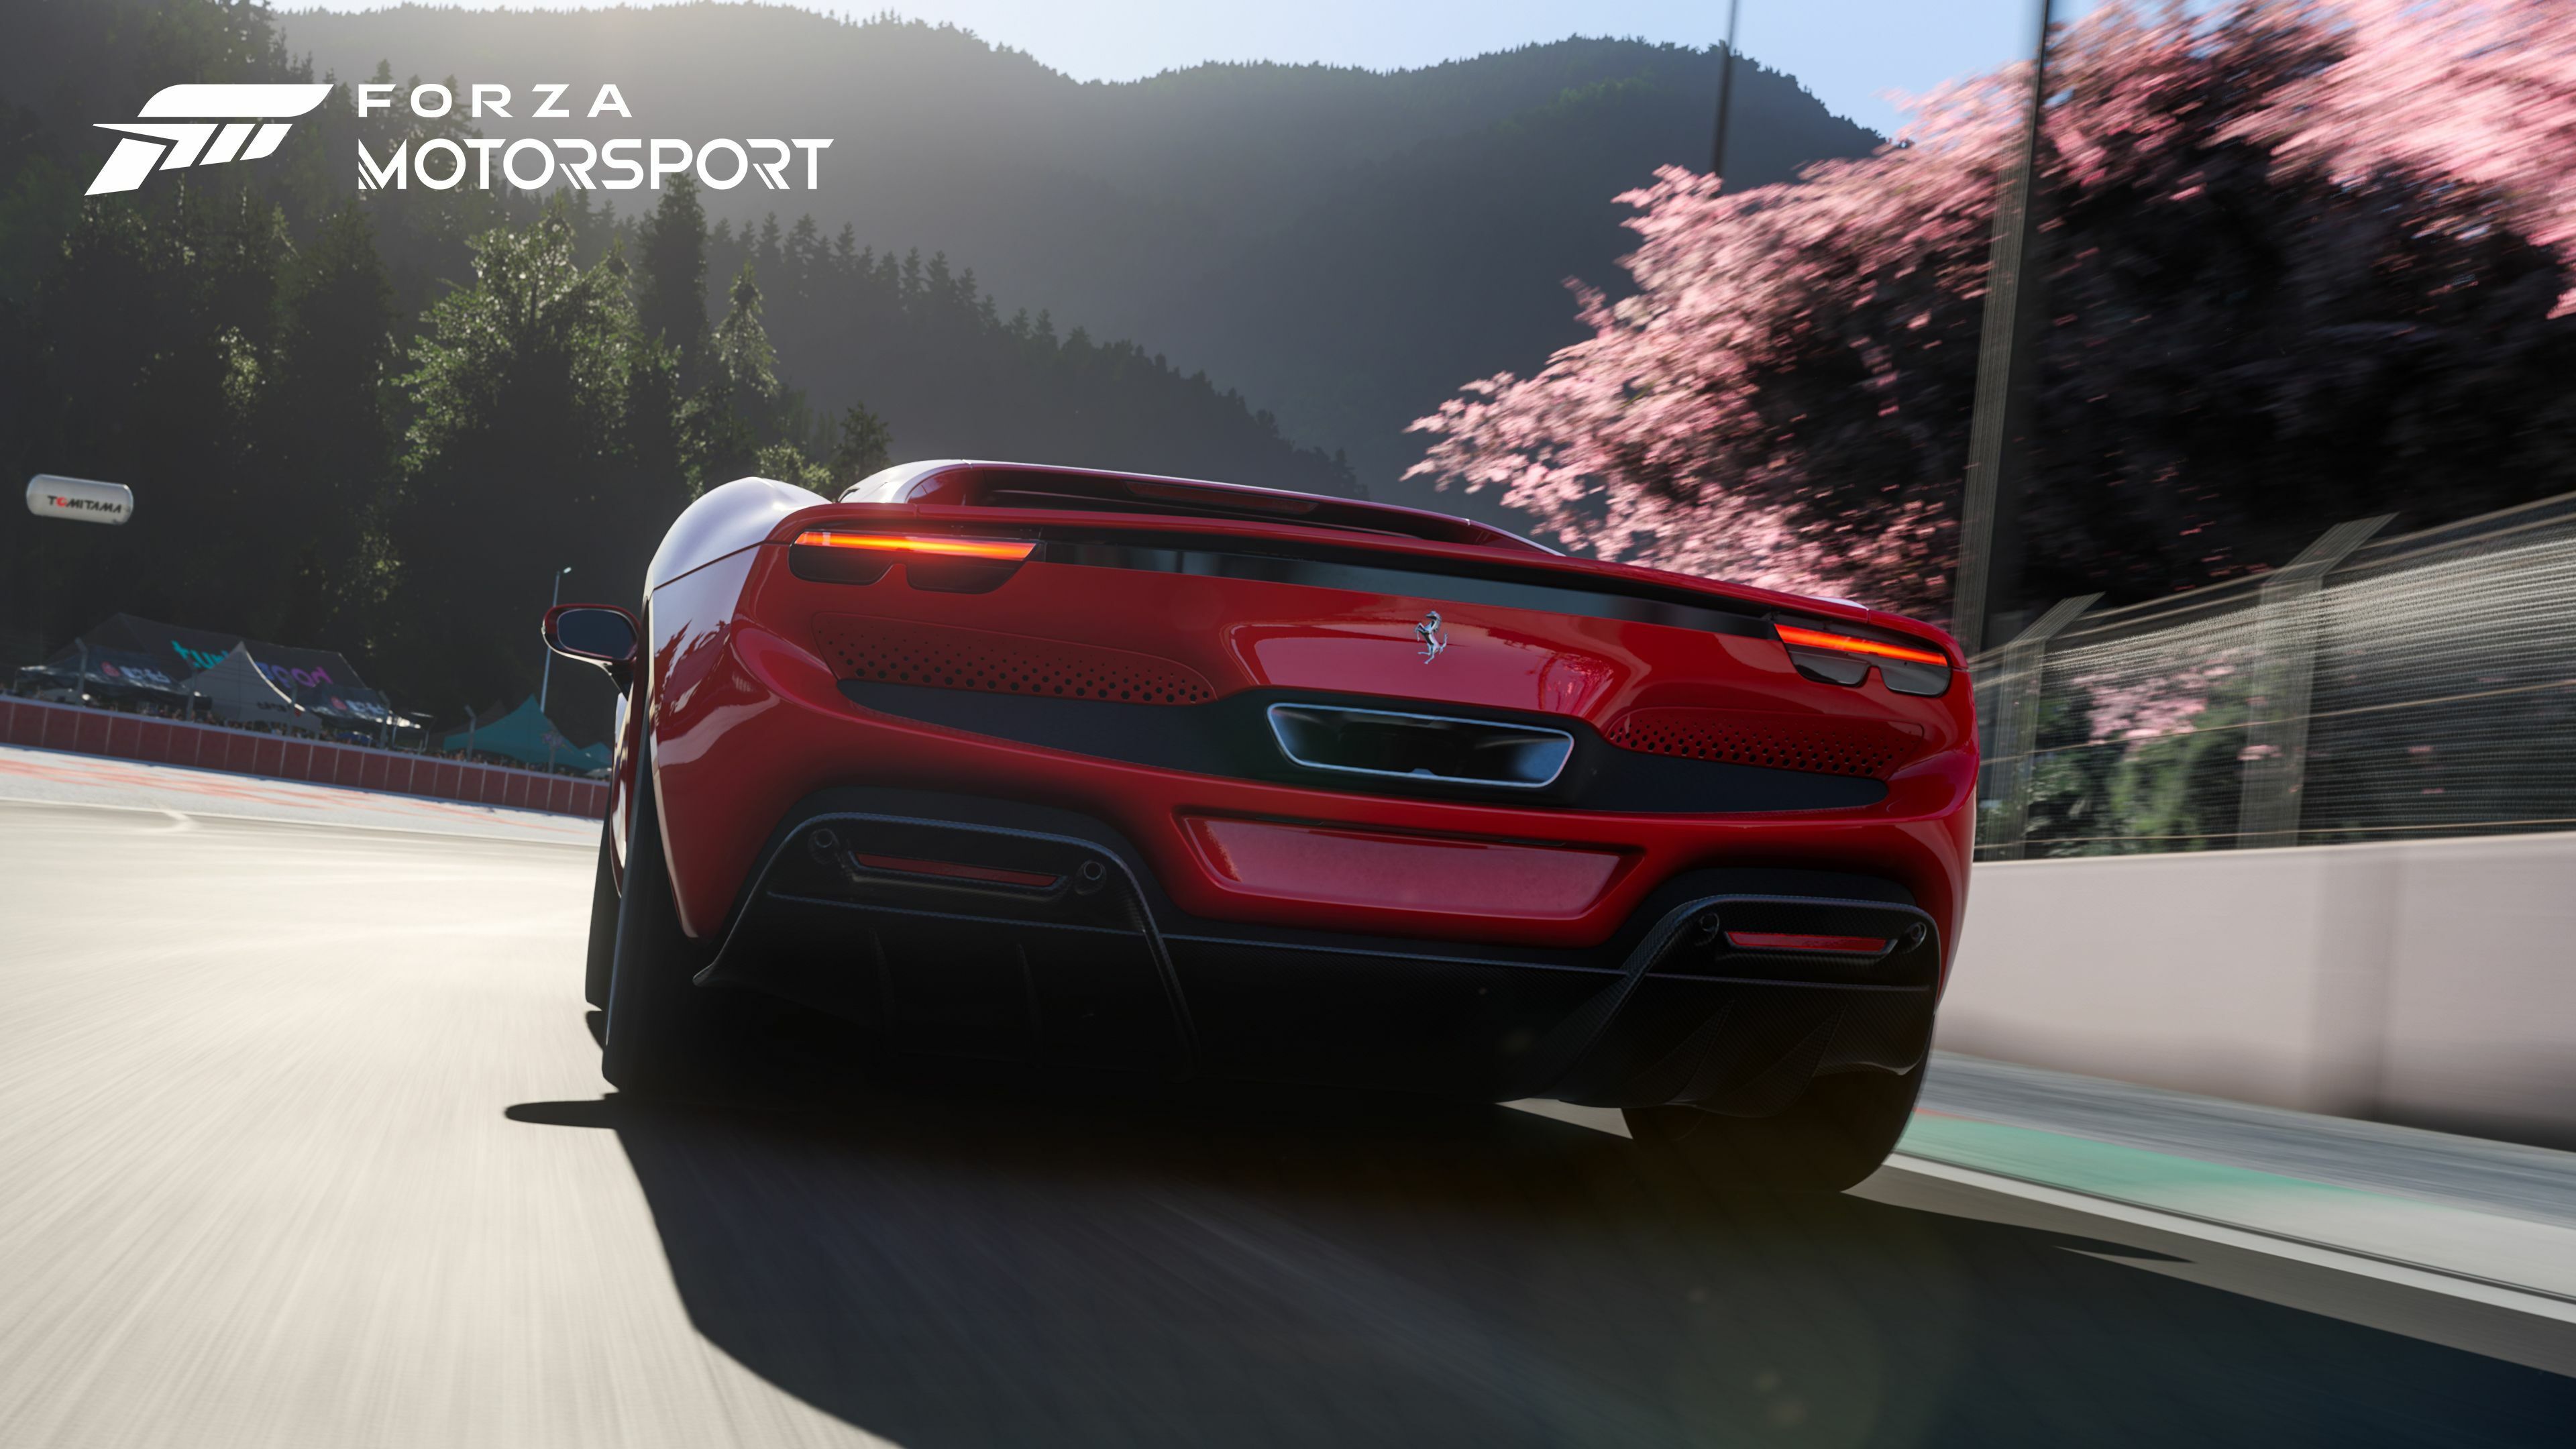 Forza Motorsport Update 3 Patch Notes: New content, multiplayer